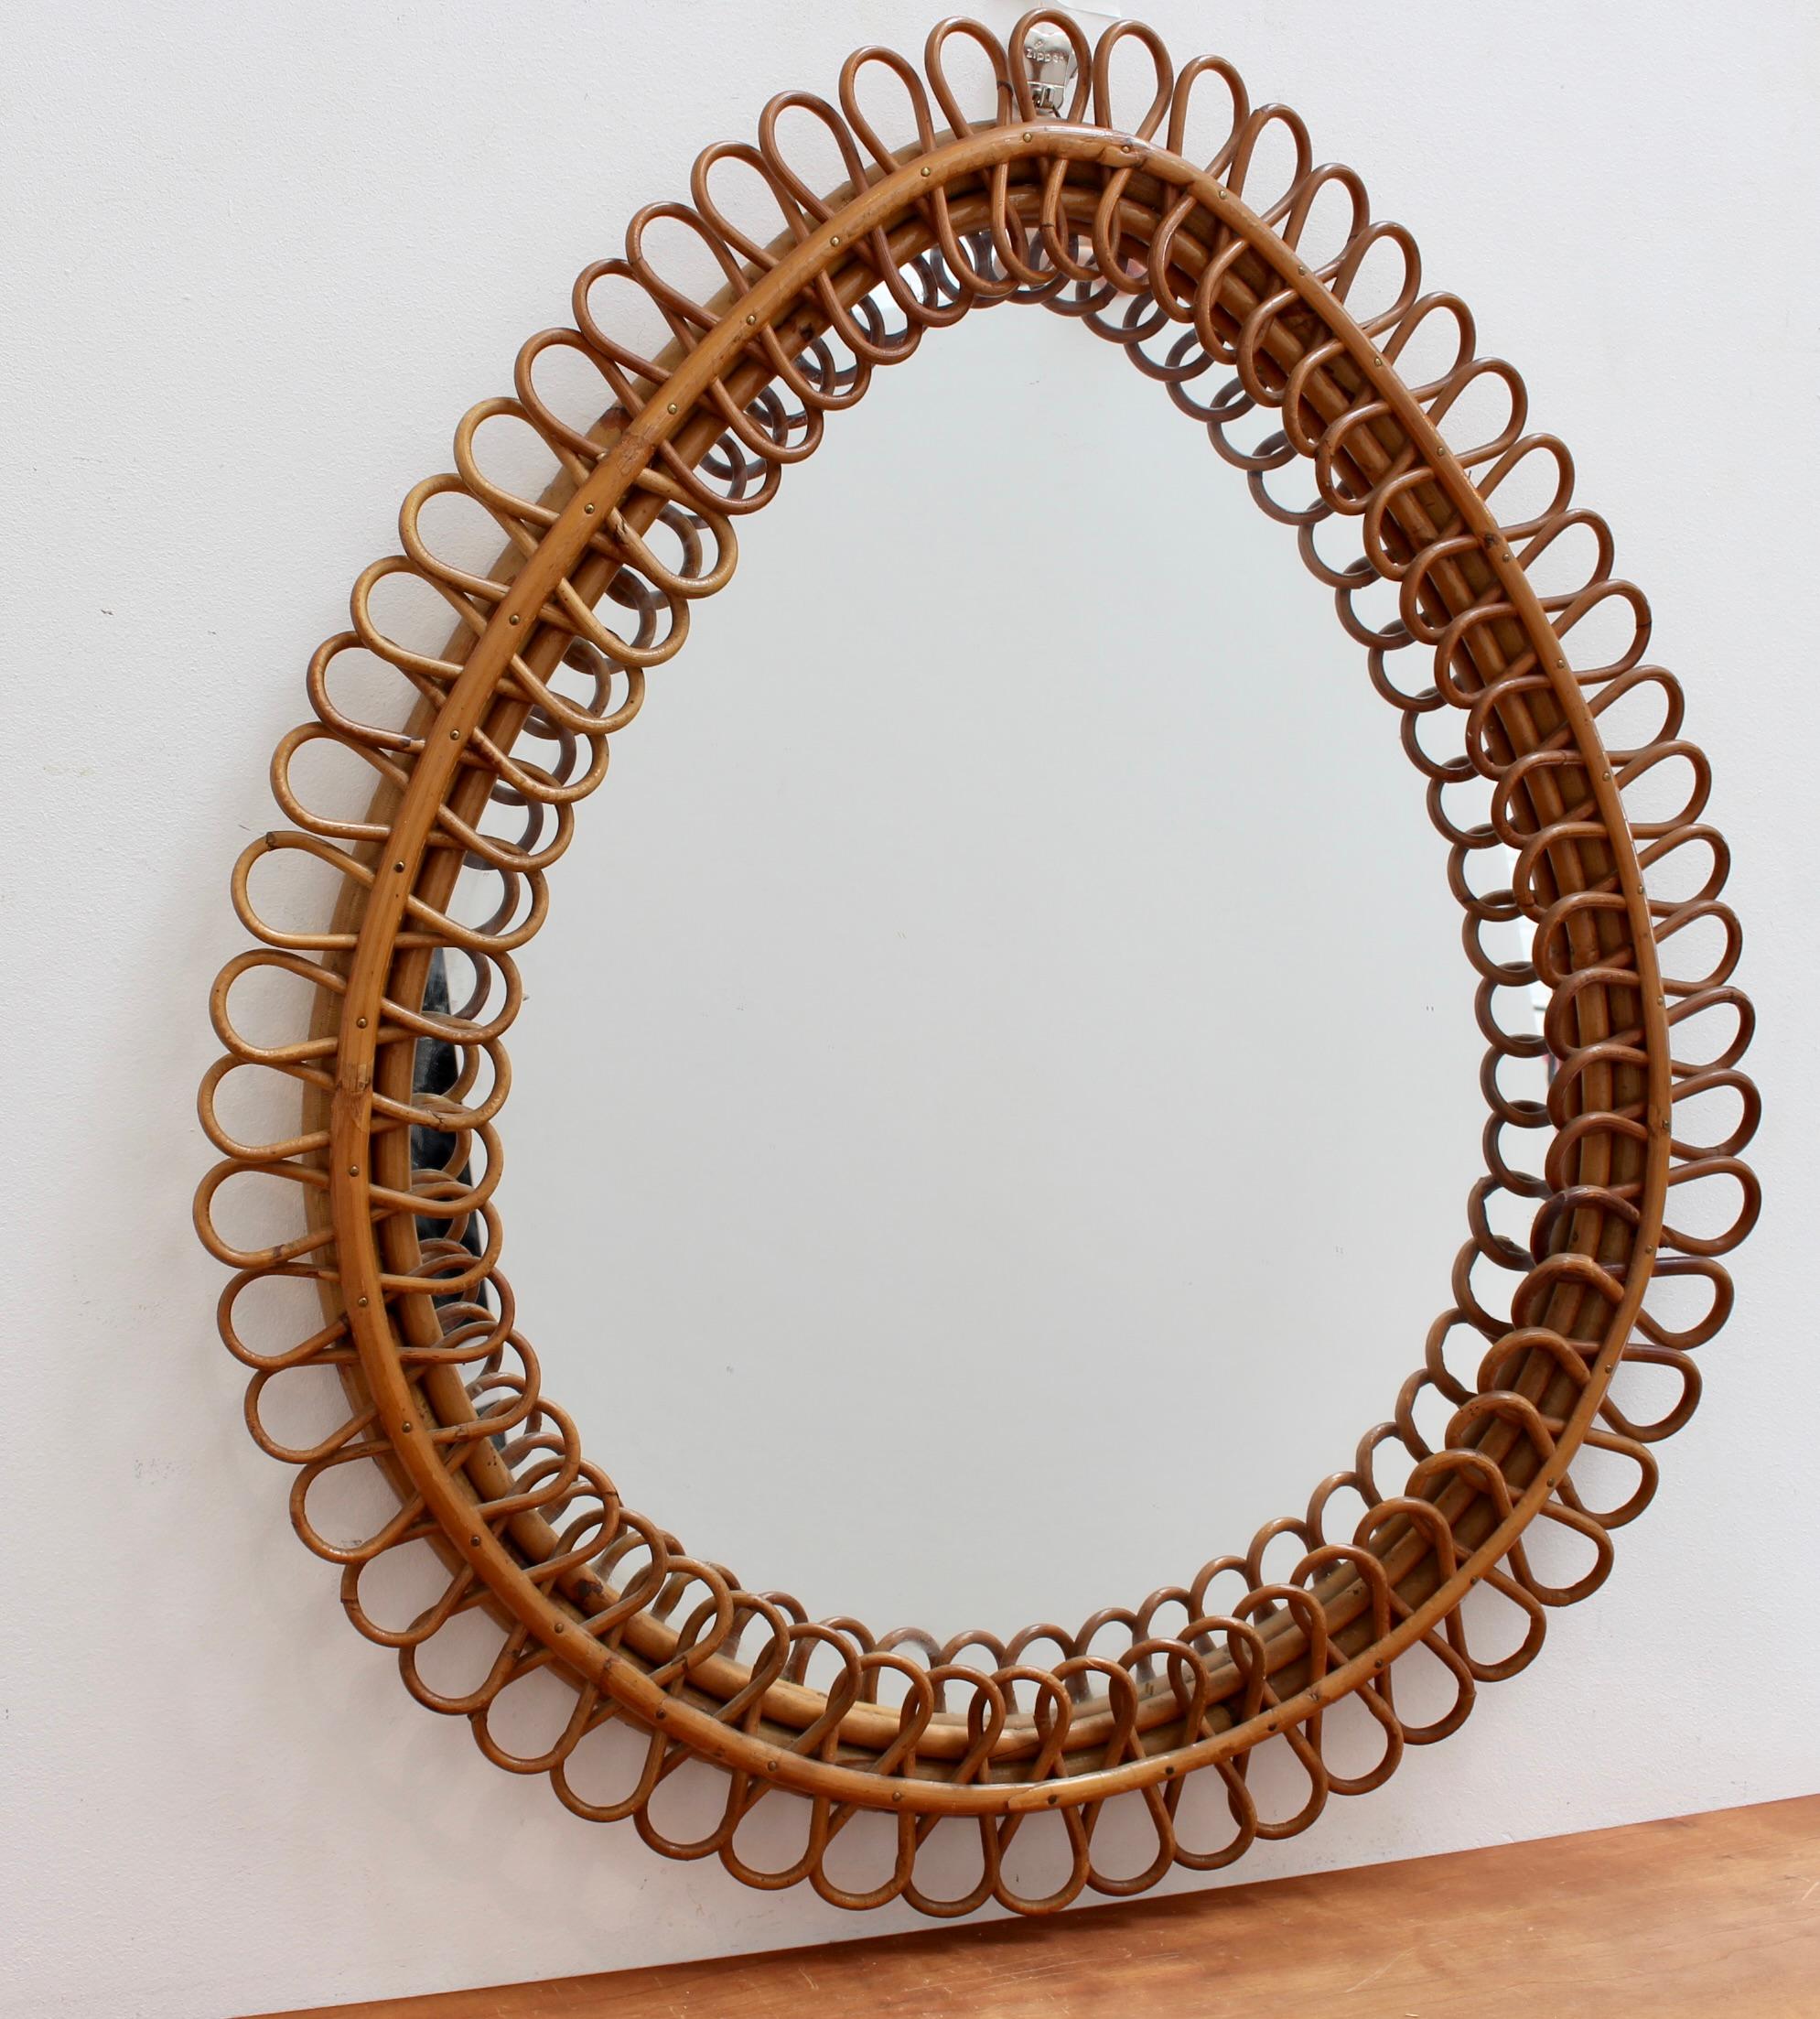 Italian teardrop rattan wall mirror (circa 1960s). This mirror has a rare teardrop form with delightful rattan figure-8 shapes framing the glass. There is a characterful, age-related patina on the rattan frame. In good overall condition commensurate